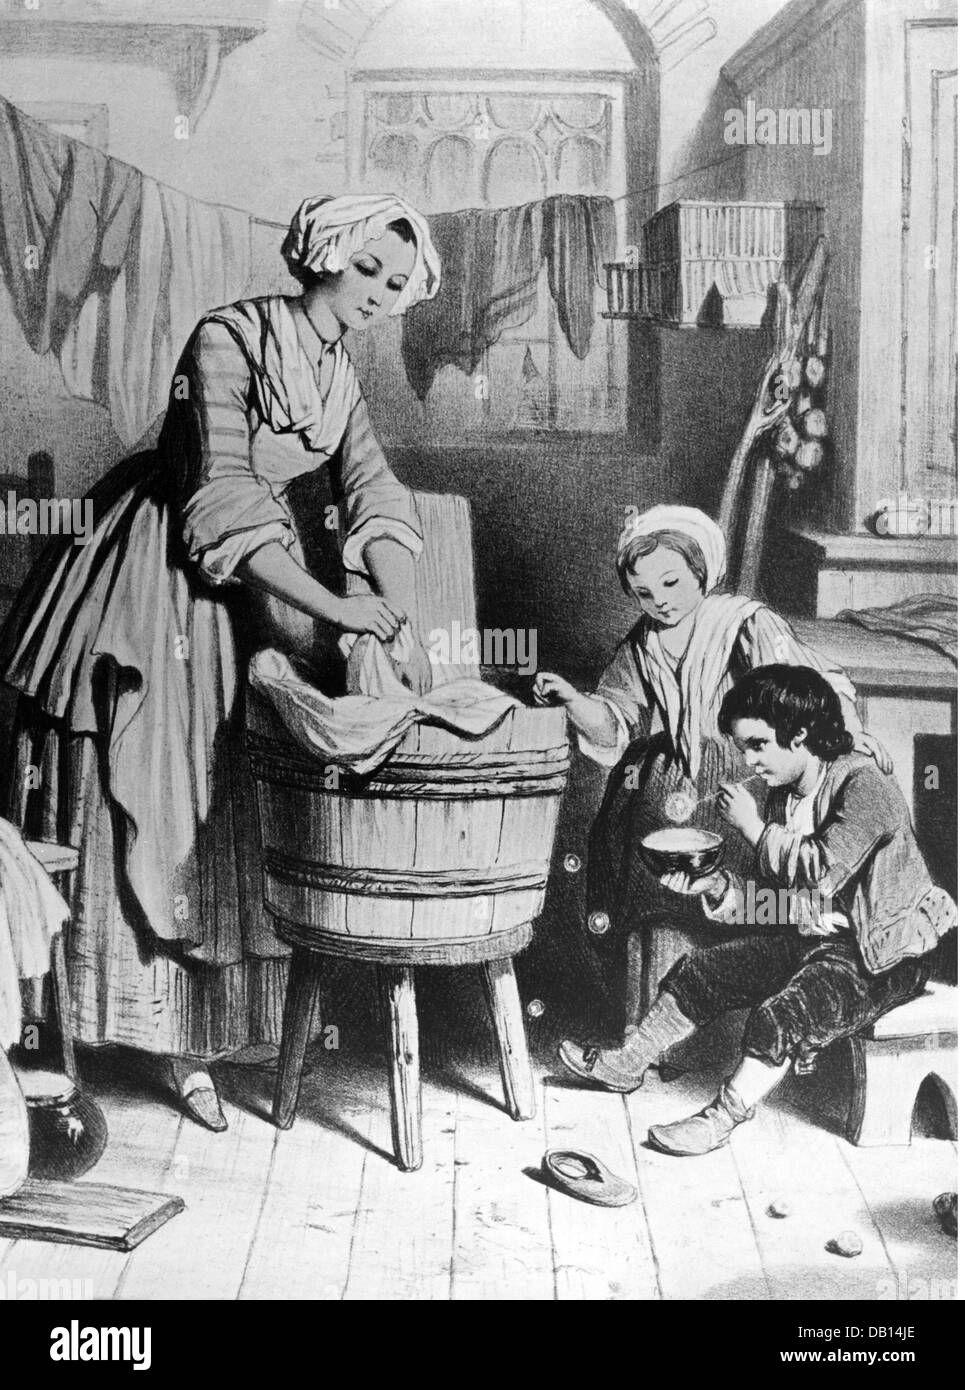 household,washing,woman washing the laundry in the tub,wood engraving,19th century,19th century,graphic,graphics,household,households,domestic work,housework,household chores,do the chores,housekeep,housewife,housewives,homemaker,half length,standing,tub,laundry,laundering,launder,clothesline,clotheslines,drying,dry,mother,mothers,daughter,daughters,son,sons,sitting,sit,bowl,bowls,soap dish,soap dishes,soap bubble,soapbubble,soap bubbles,soapbubbles,fun,practical joke,hoax,prank,trick,pranks,tricks,washing,was,Additional-Rights-Clearences-Not Available Stock Photo